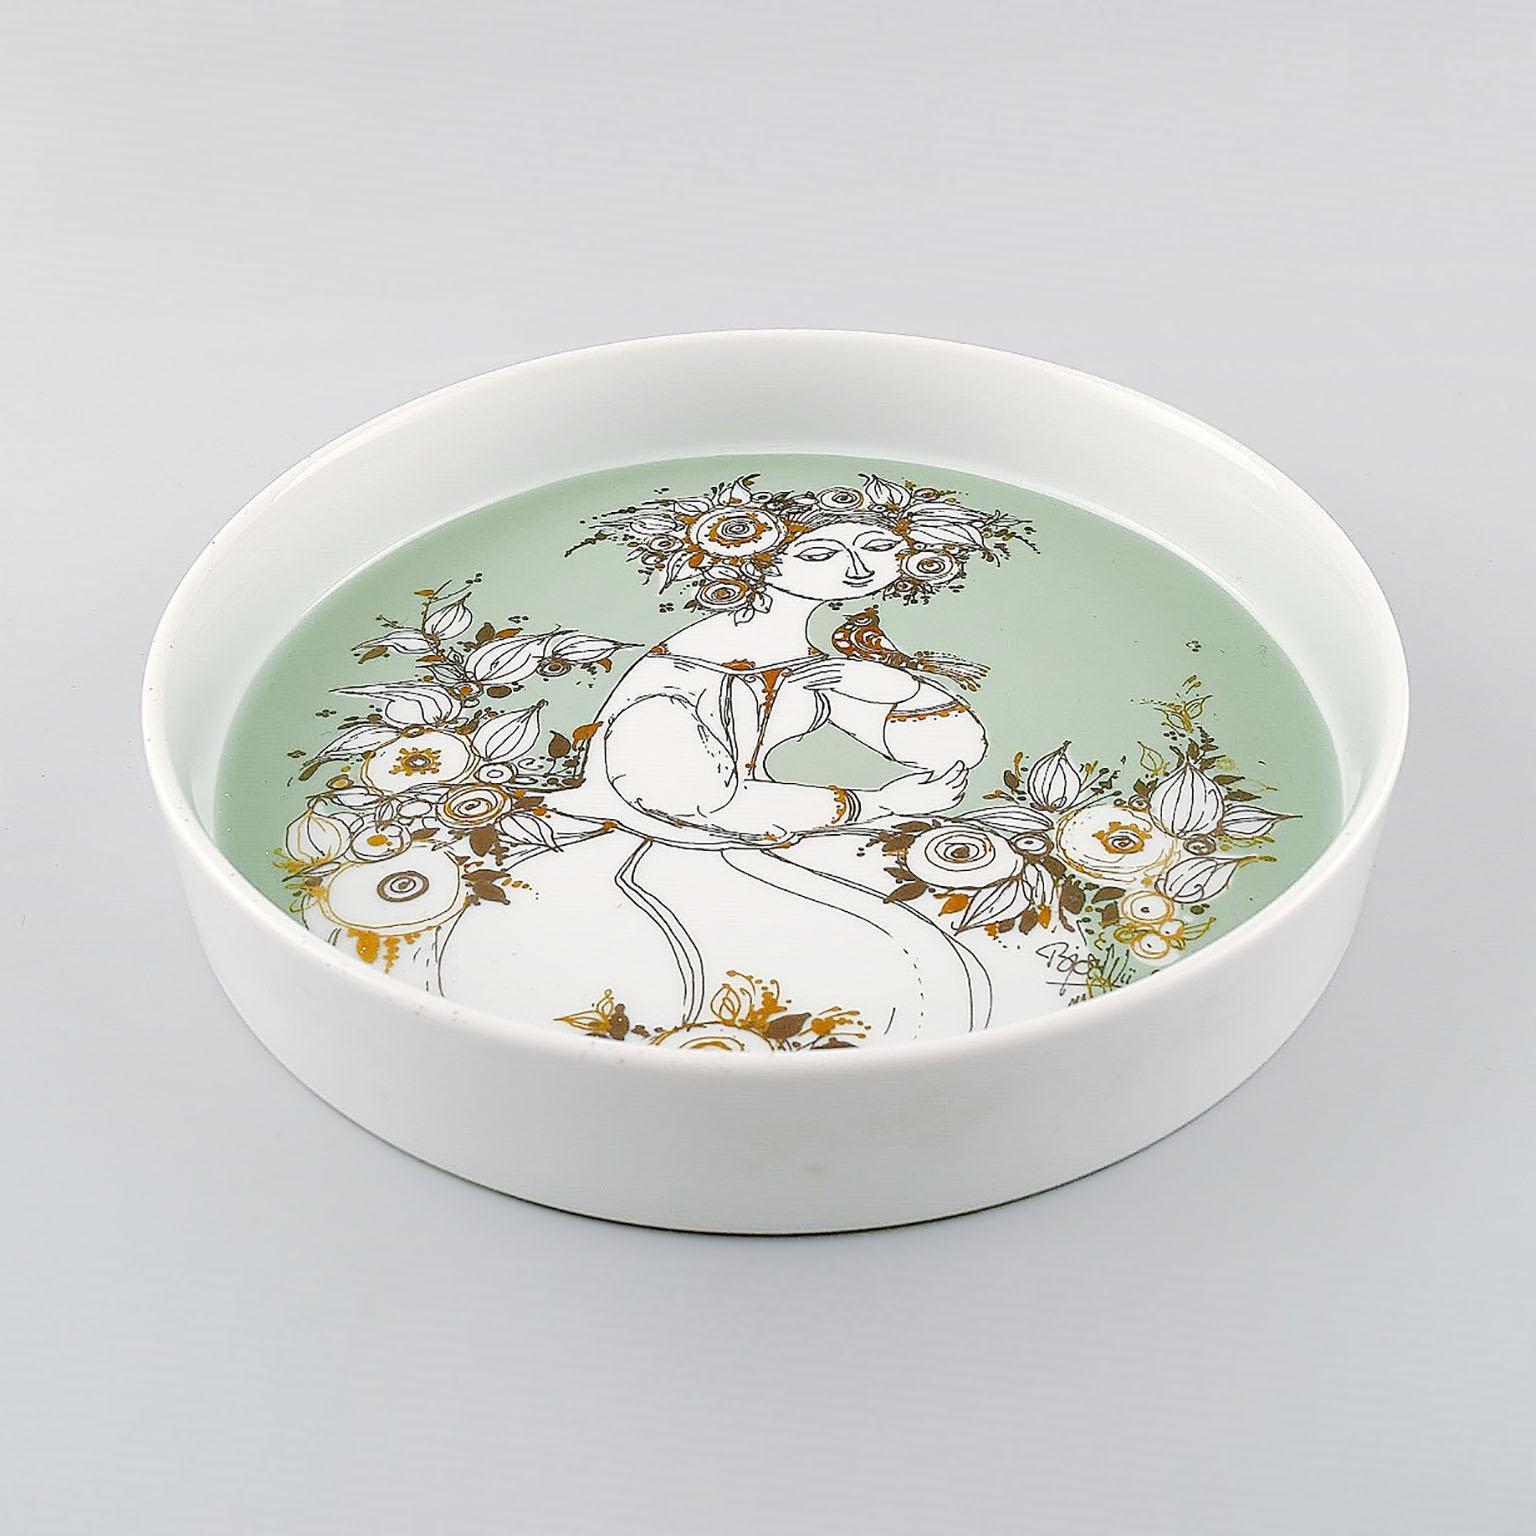 Bjorn Wiinblad for Rosenthal studio-line, gold painting over a light green background, Germany 1970s
Marked to the bottom.
In perfect condition.
Dimensions:
Diameter 25 cm [9.9 in.]
Height 4 cm [1.6 in].